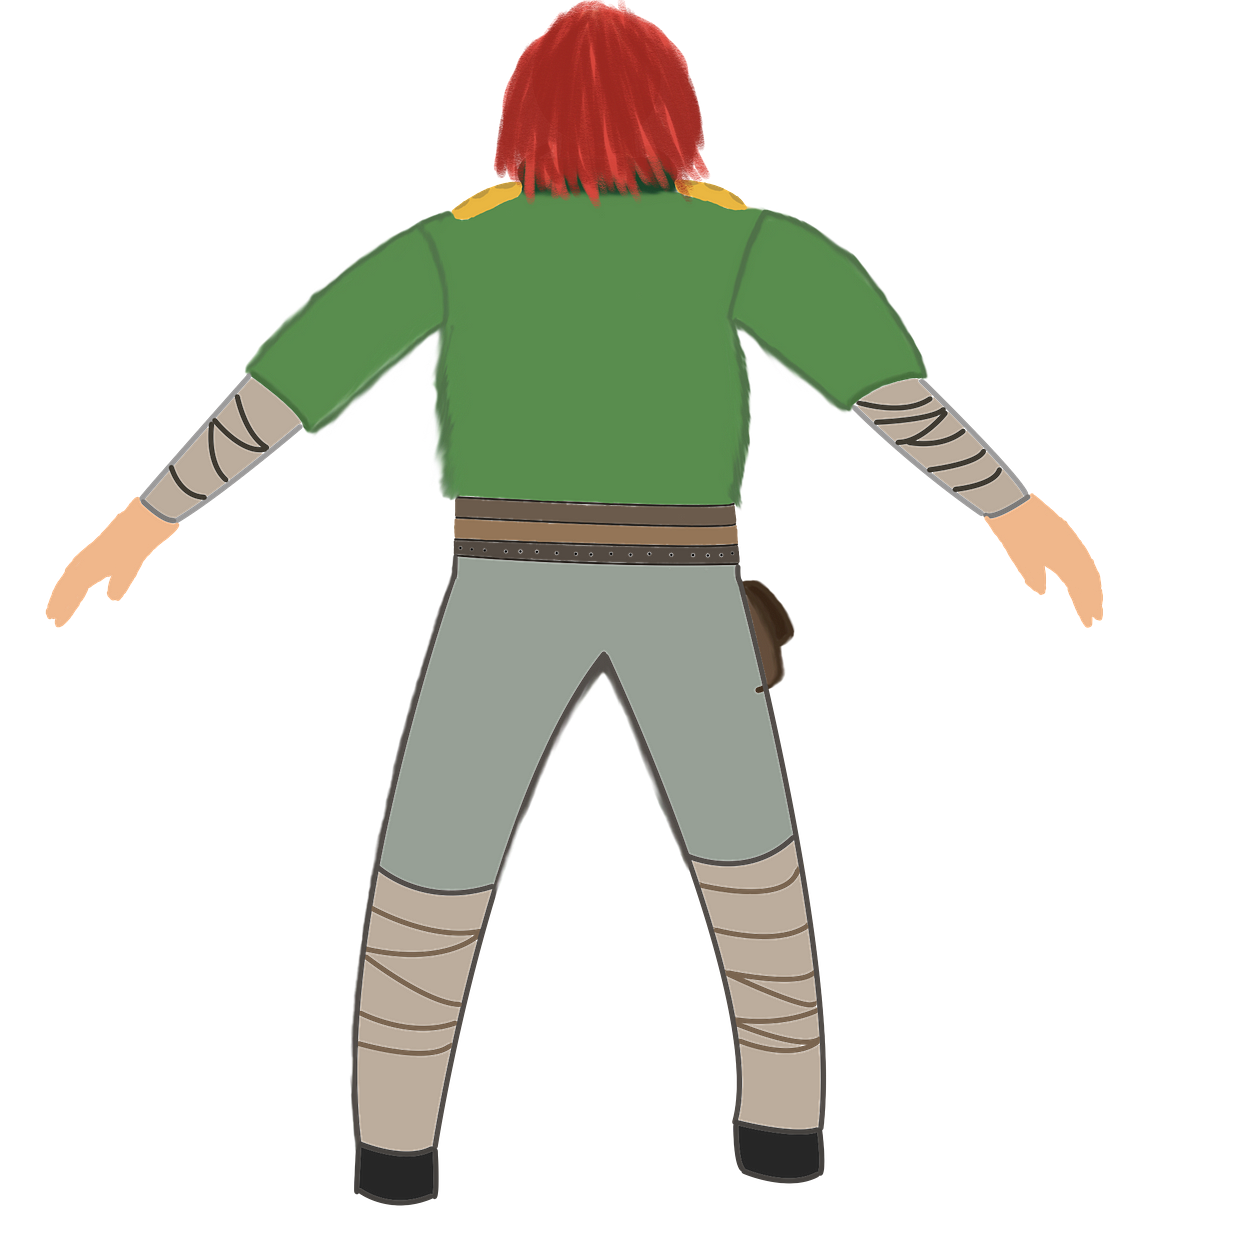 Third person character view design